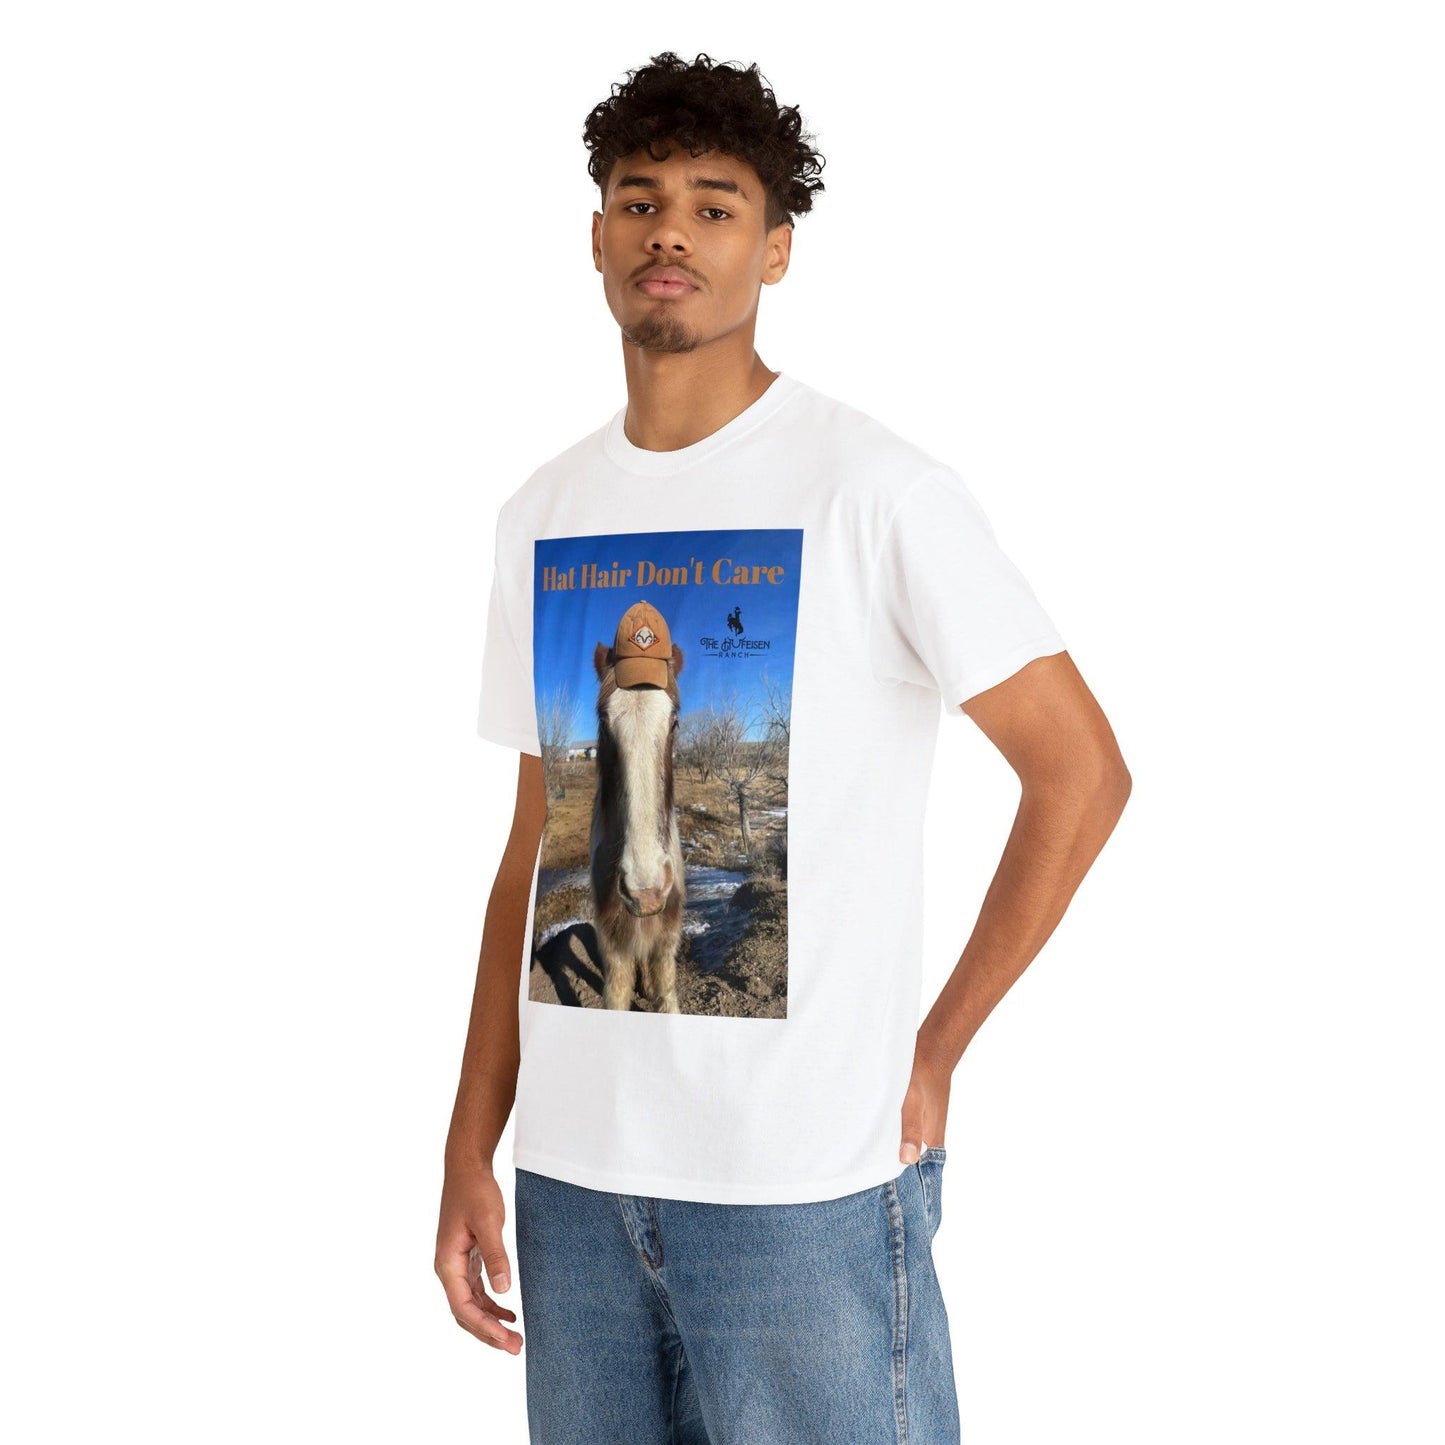 Hat Hair Don’t Care Heavy Cotton TeeThe heavy cotton tee is the basic staple of any wardrobe. It is the foundation upon which casual fashion grows. All it needs is a personalized design to elevate thinCare Heavy Cotton TeeThe Hufeisen-Ranch (WYO Wagyu)T-Shirt